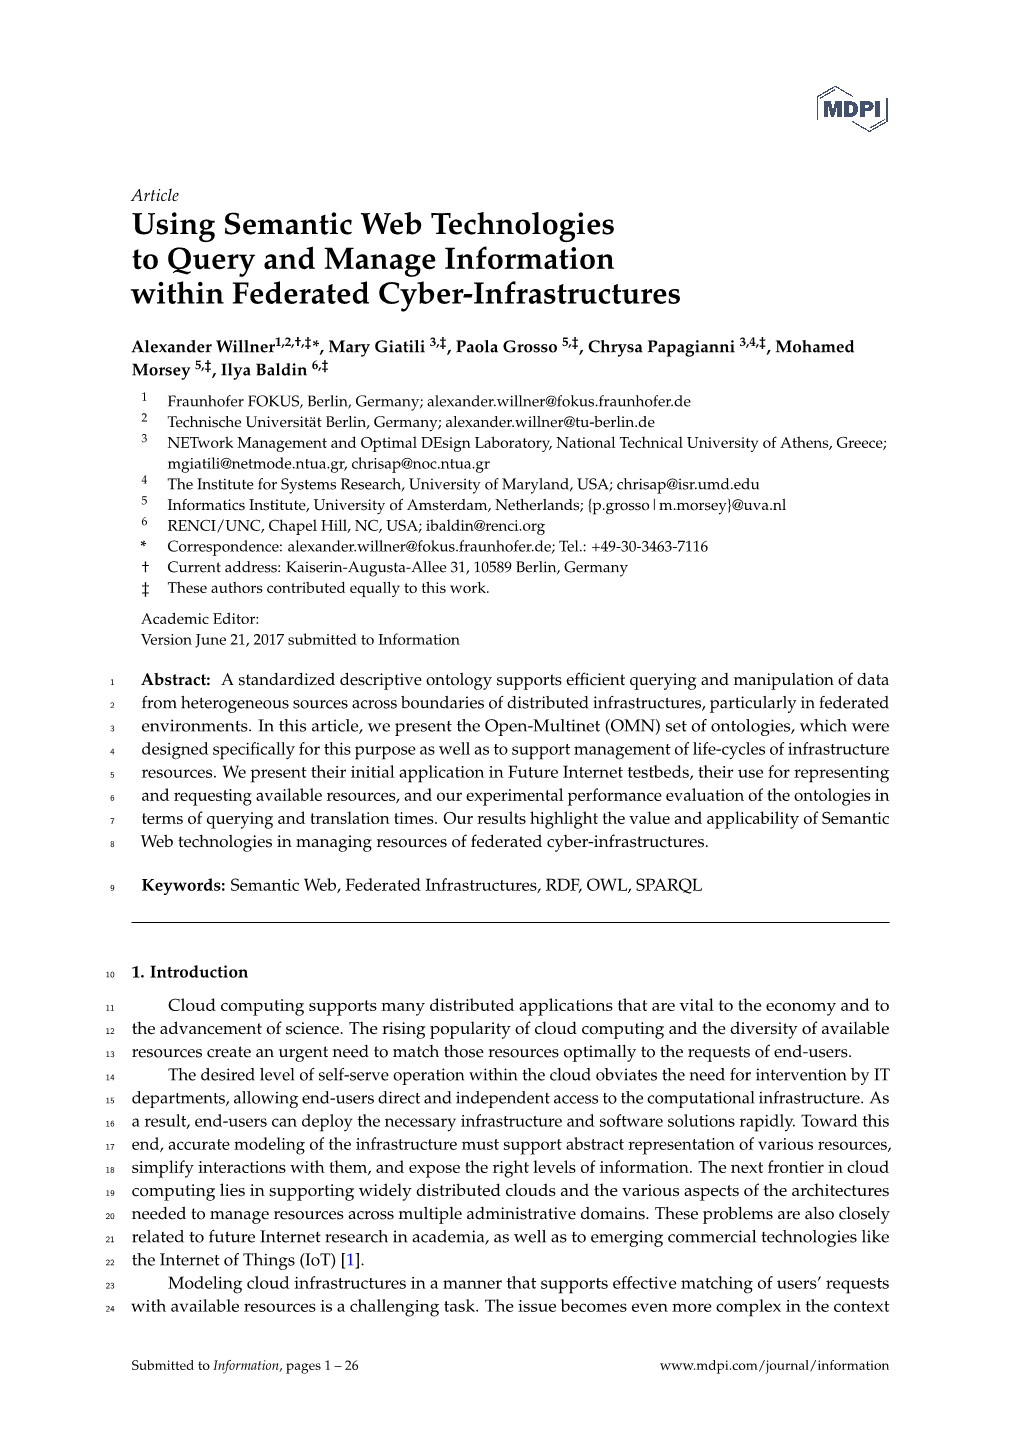 Using Semantic Web Technologies to Query and Manage Information Within Federated Cyber-Infrastructures